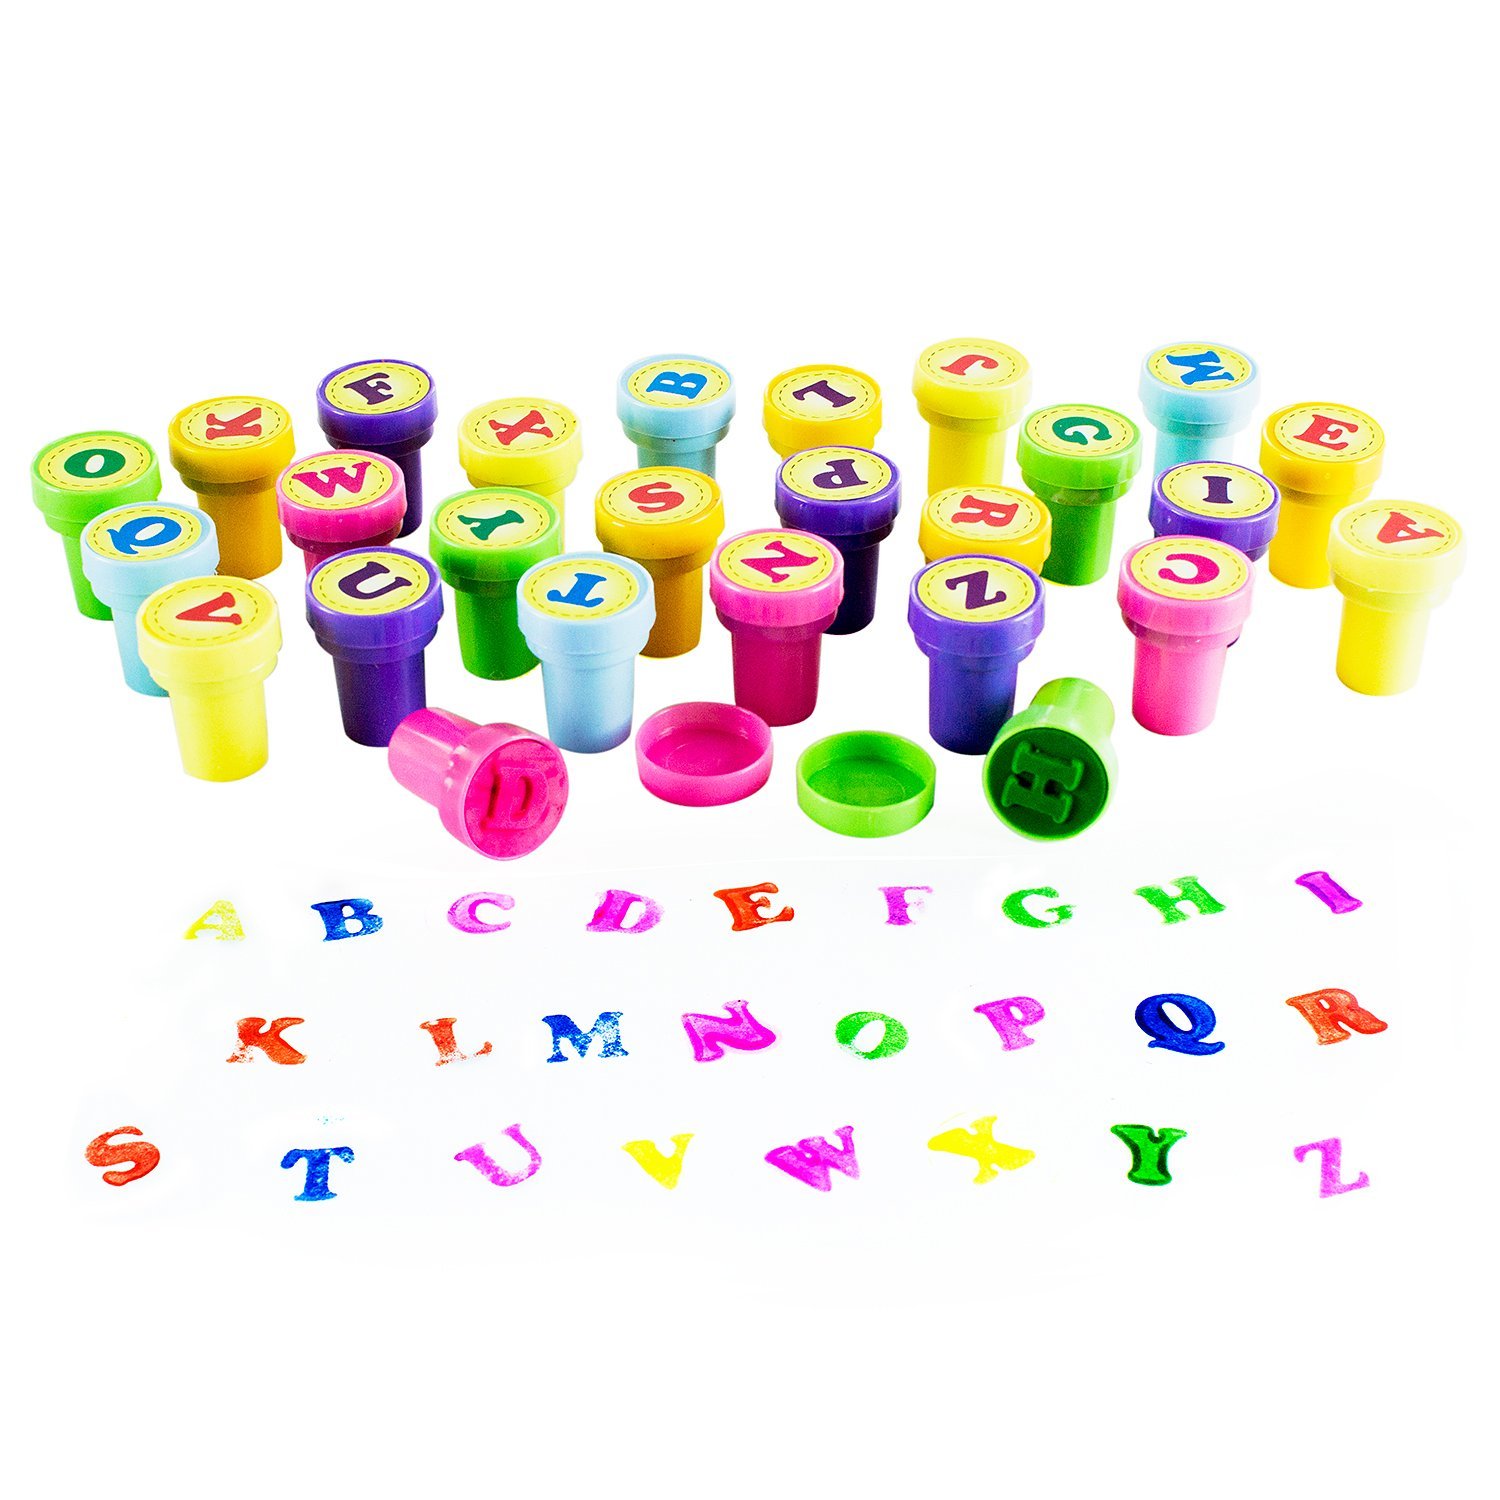 Assorted Mini Colorful Rubber Alphabet Letter Stamps for Children, Party  Favor Gifts, Arts & Crafts Projects (26 Pieces) by Super Z Outlet 